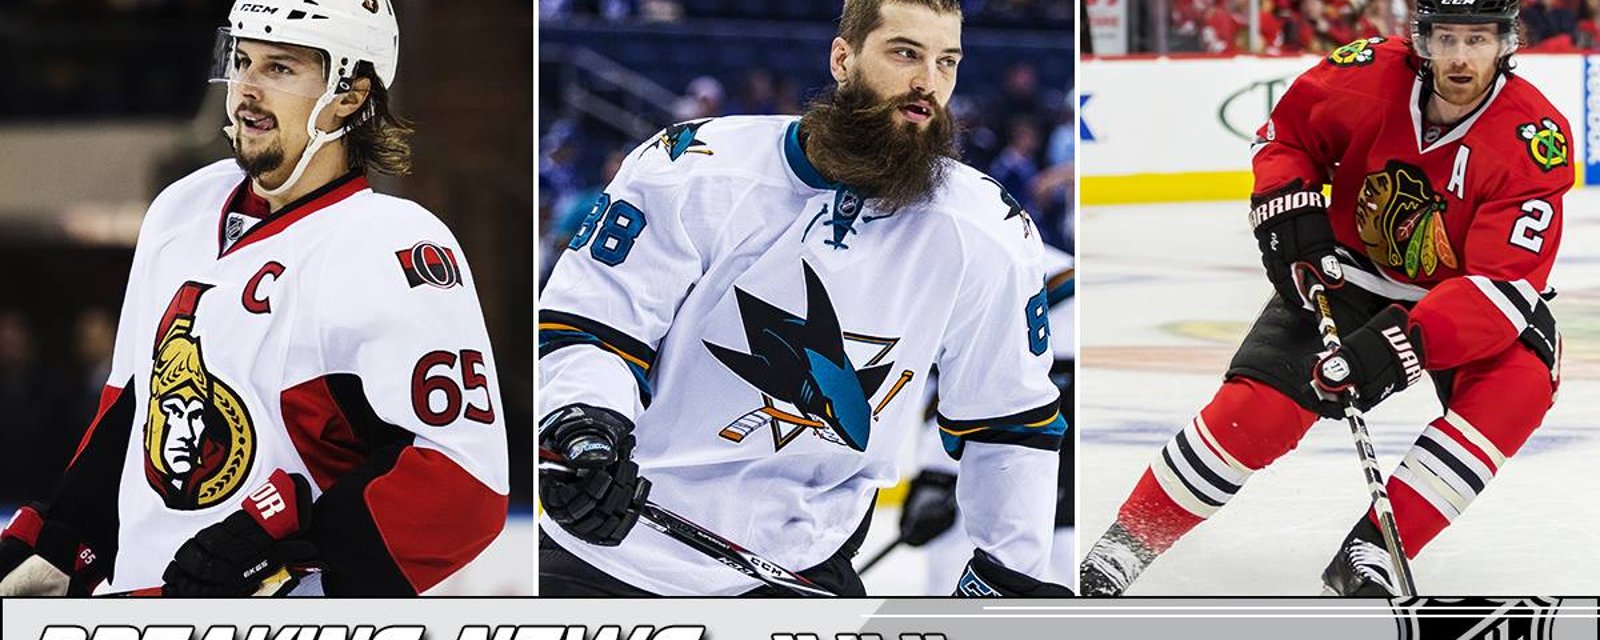 Breaking: An early look at who may win the Norris Trophy